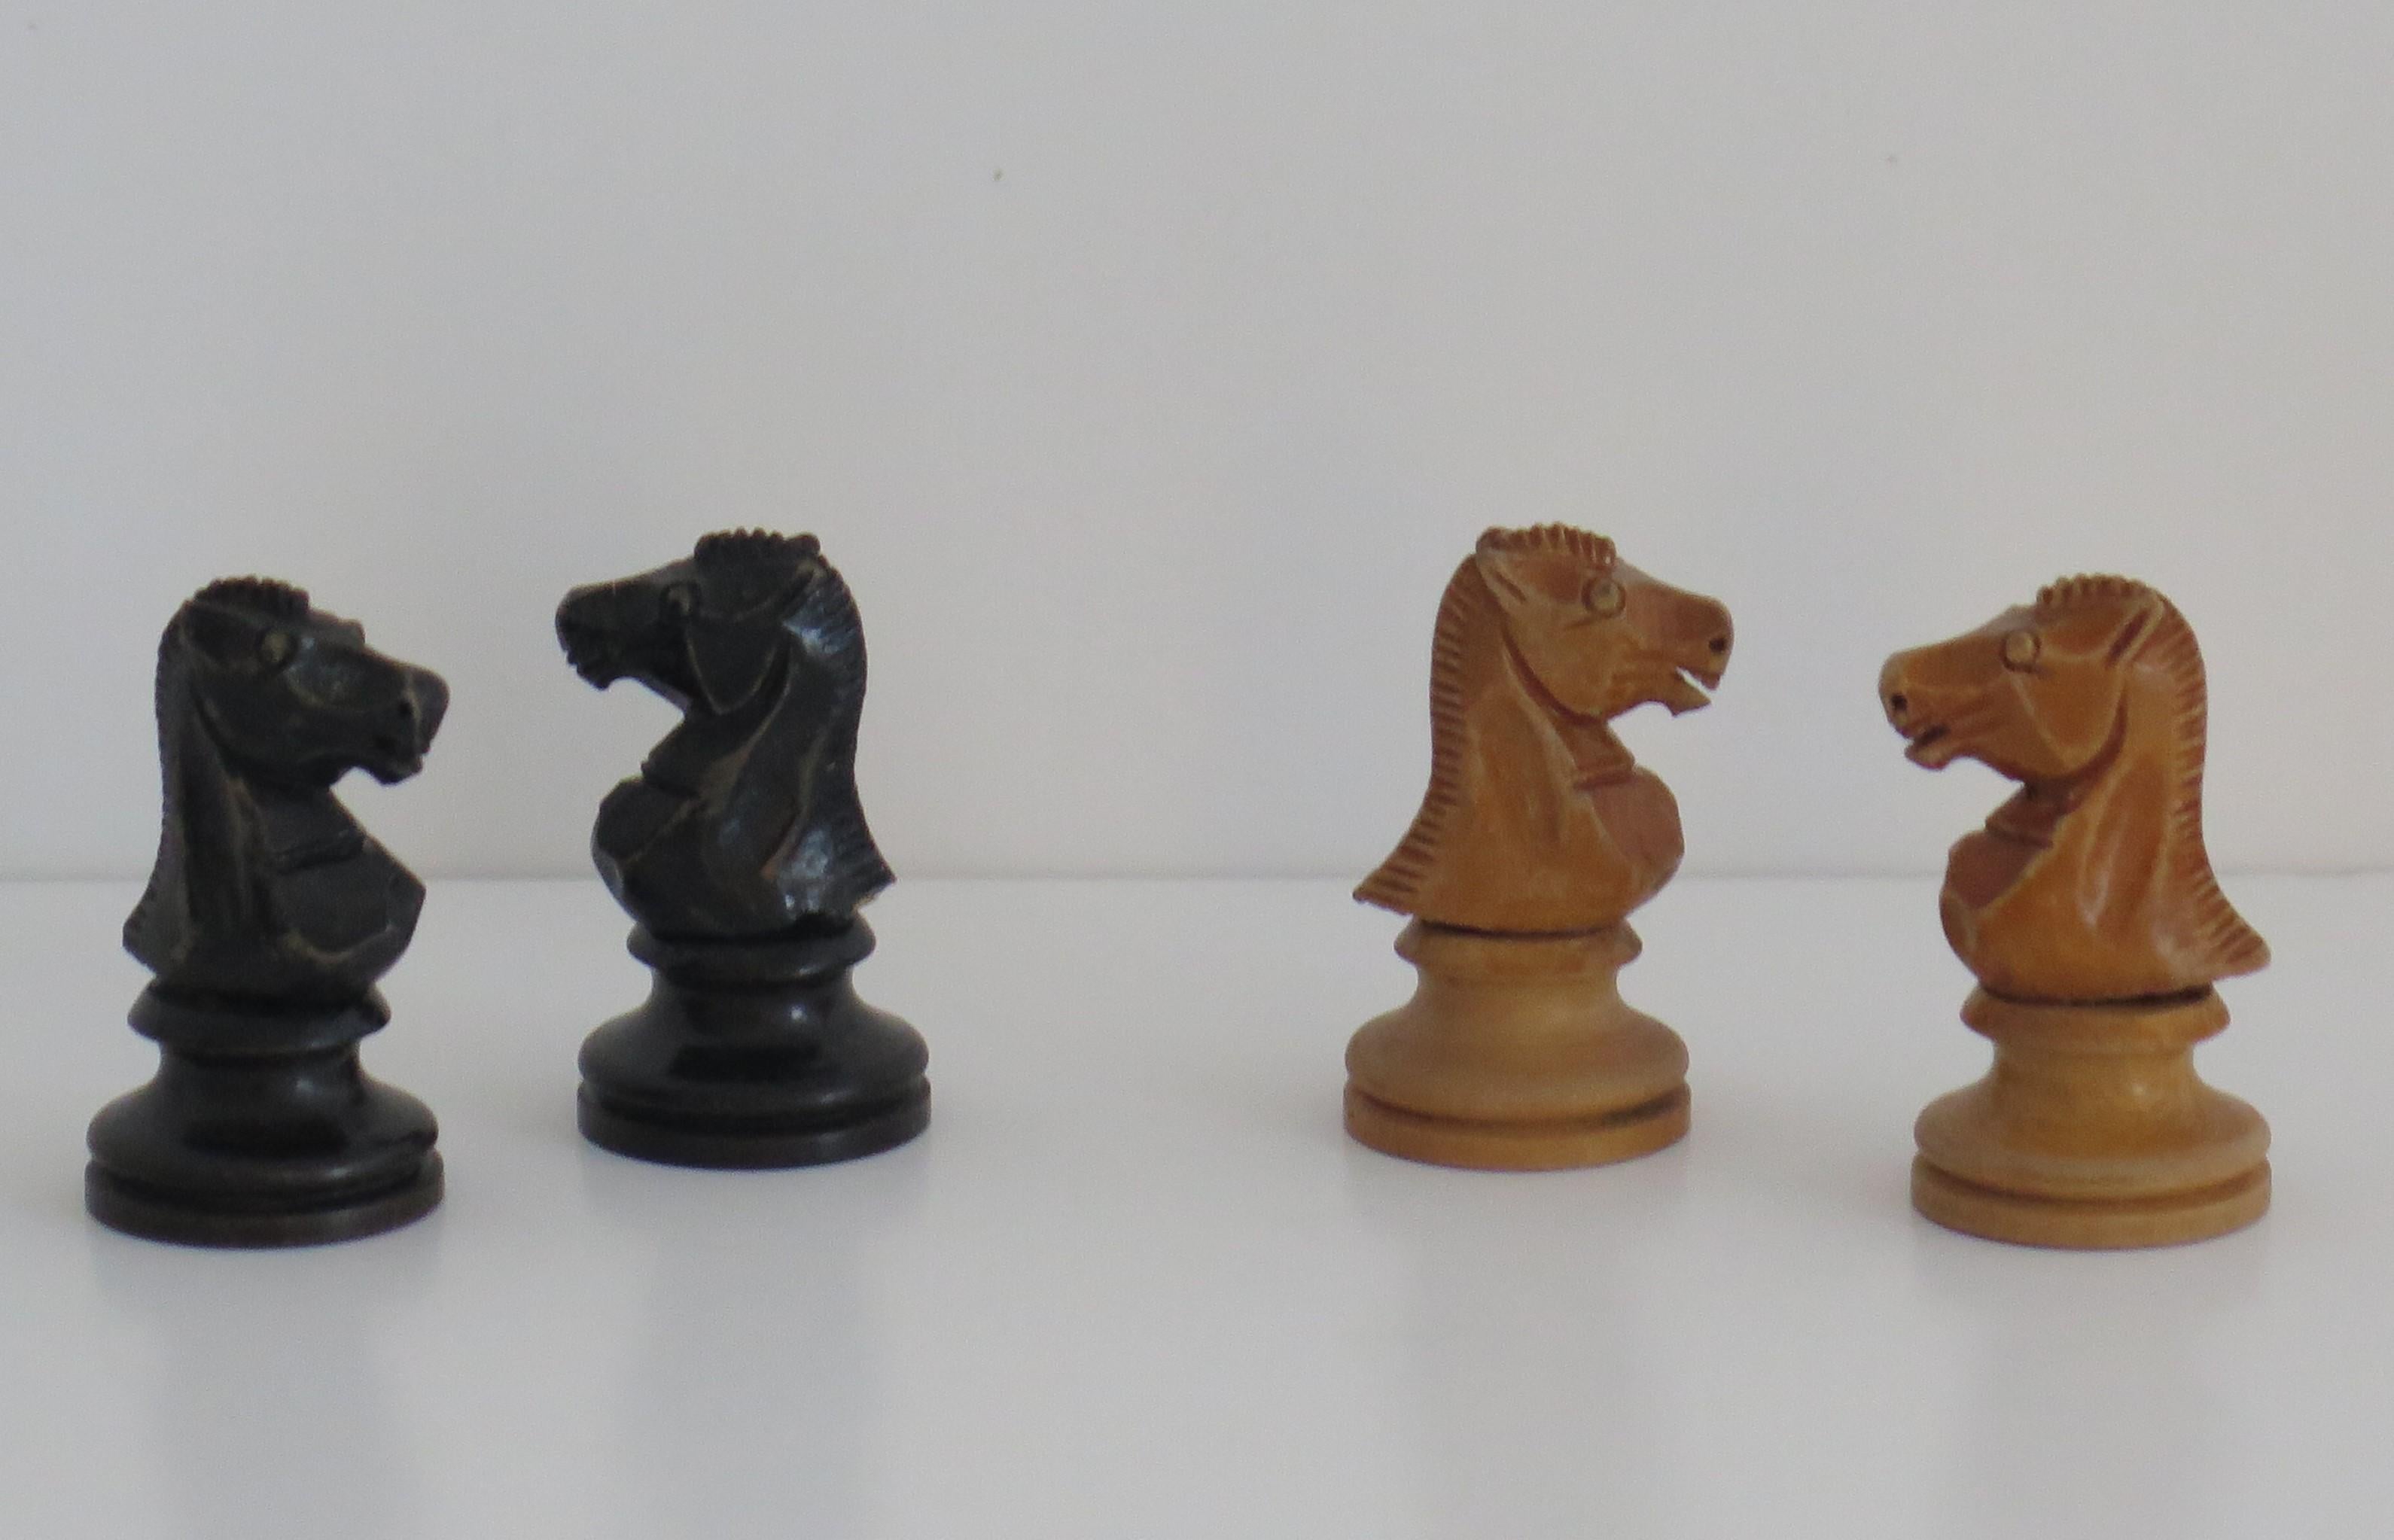 Hardwood Staunton Fierce Knight Weighted Chess Set Kings in Jointed Box, 19th Century